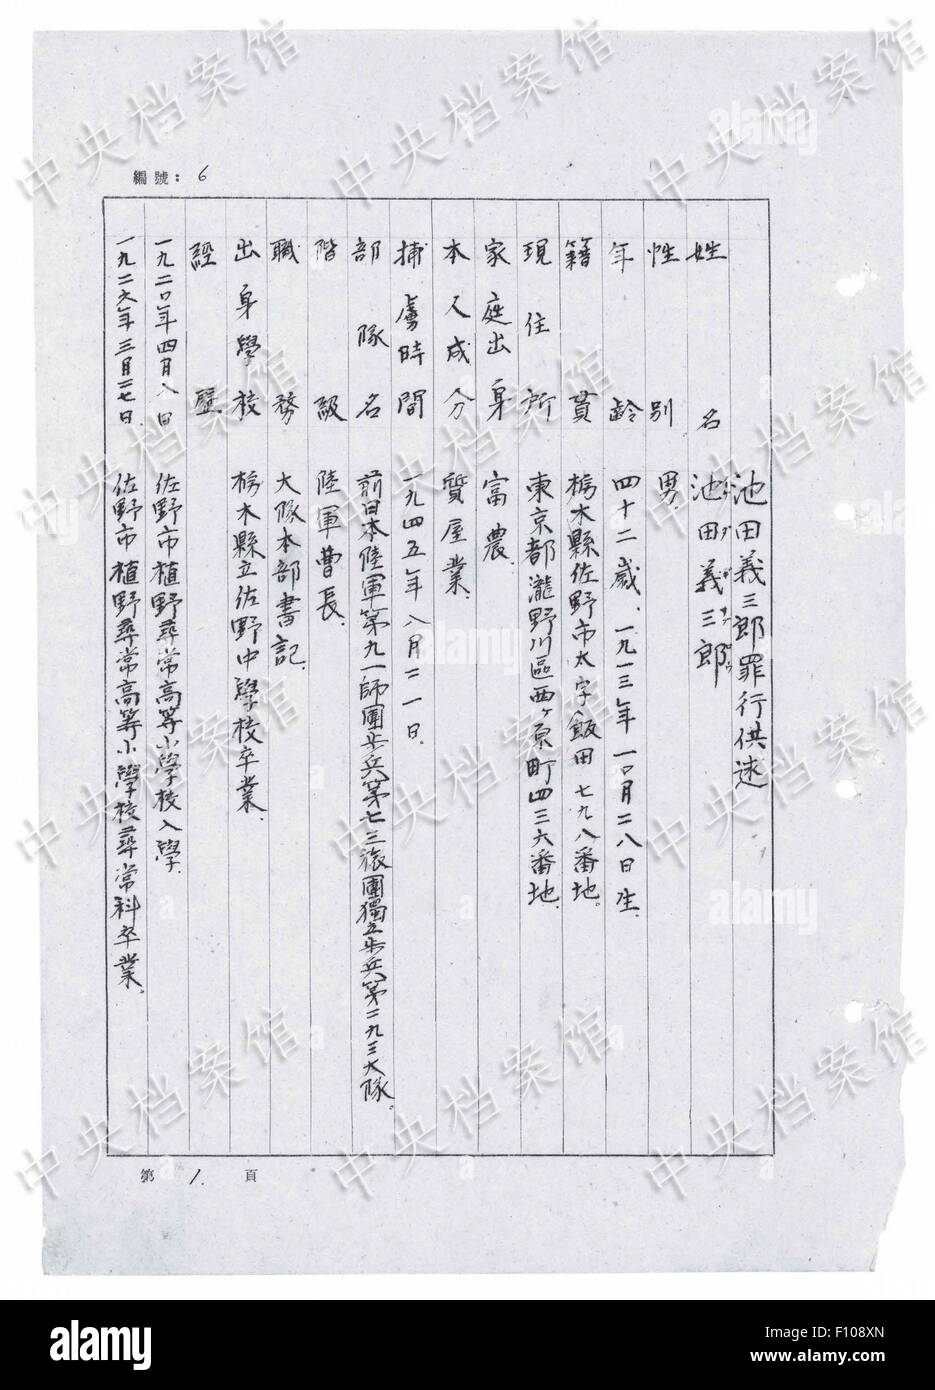 (150824) -- BEIJING, Aug. 24, 2015 (Xinhua) -- Photo released on Aug. 24, 2015 by the State Archives Administration of China on its website shows an excerpt from Japanese war criminal Gisaburo Ikeda's handwritten confession. The fourteenth in a series of 31 handwritten confessions from Japanese war criminals published online, the confession features Gisaburo Ikeda, who was born in Tokyo-to, Japan in 1913. He joined the Japanese War of Aggression against China in 1933, and was captured in August 1945. Ikeda's troops drove some 1,000 Chinese residents out of the town Zhongmou, and into the Y Stock Photo